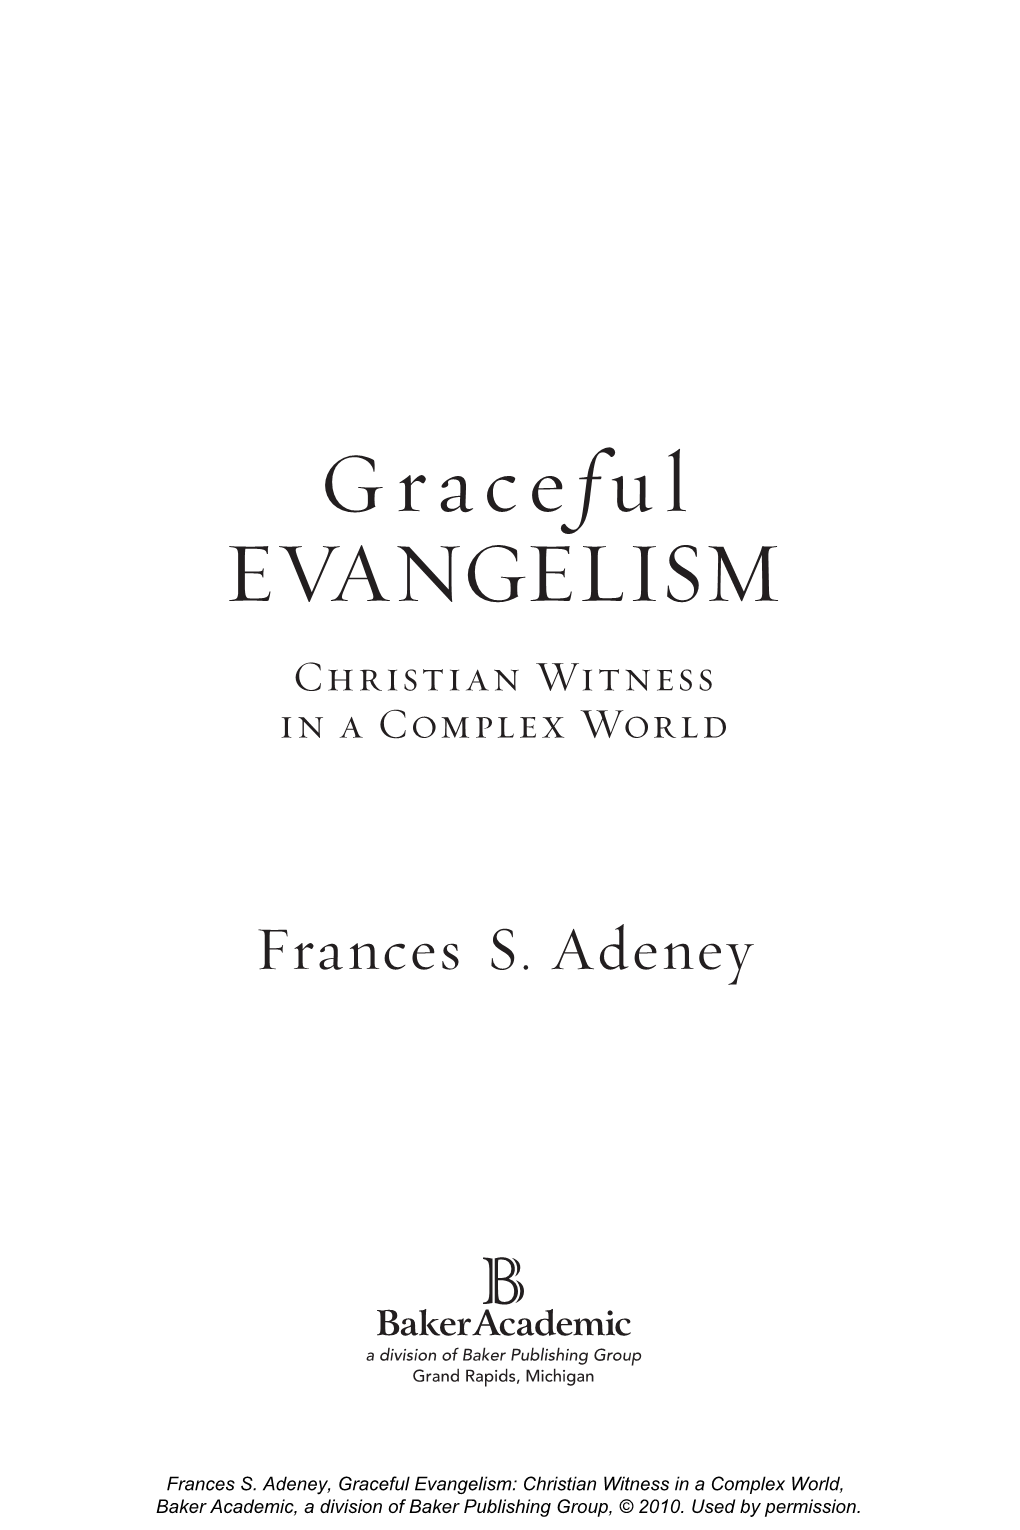 Graceful Evangelism: Christian Witness in a Complex World, Baker Academic, a Division of Baker Publishing Group, © 2010